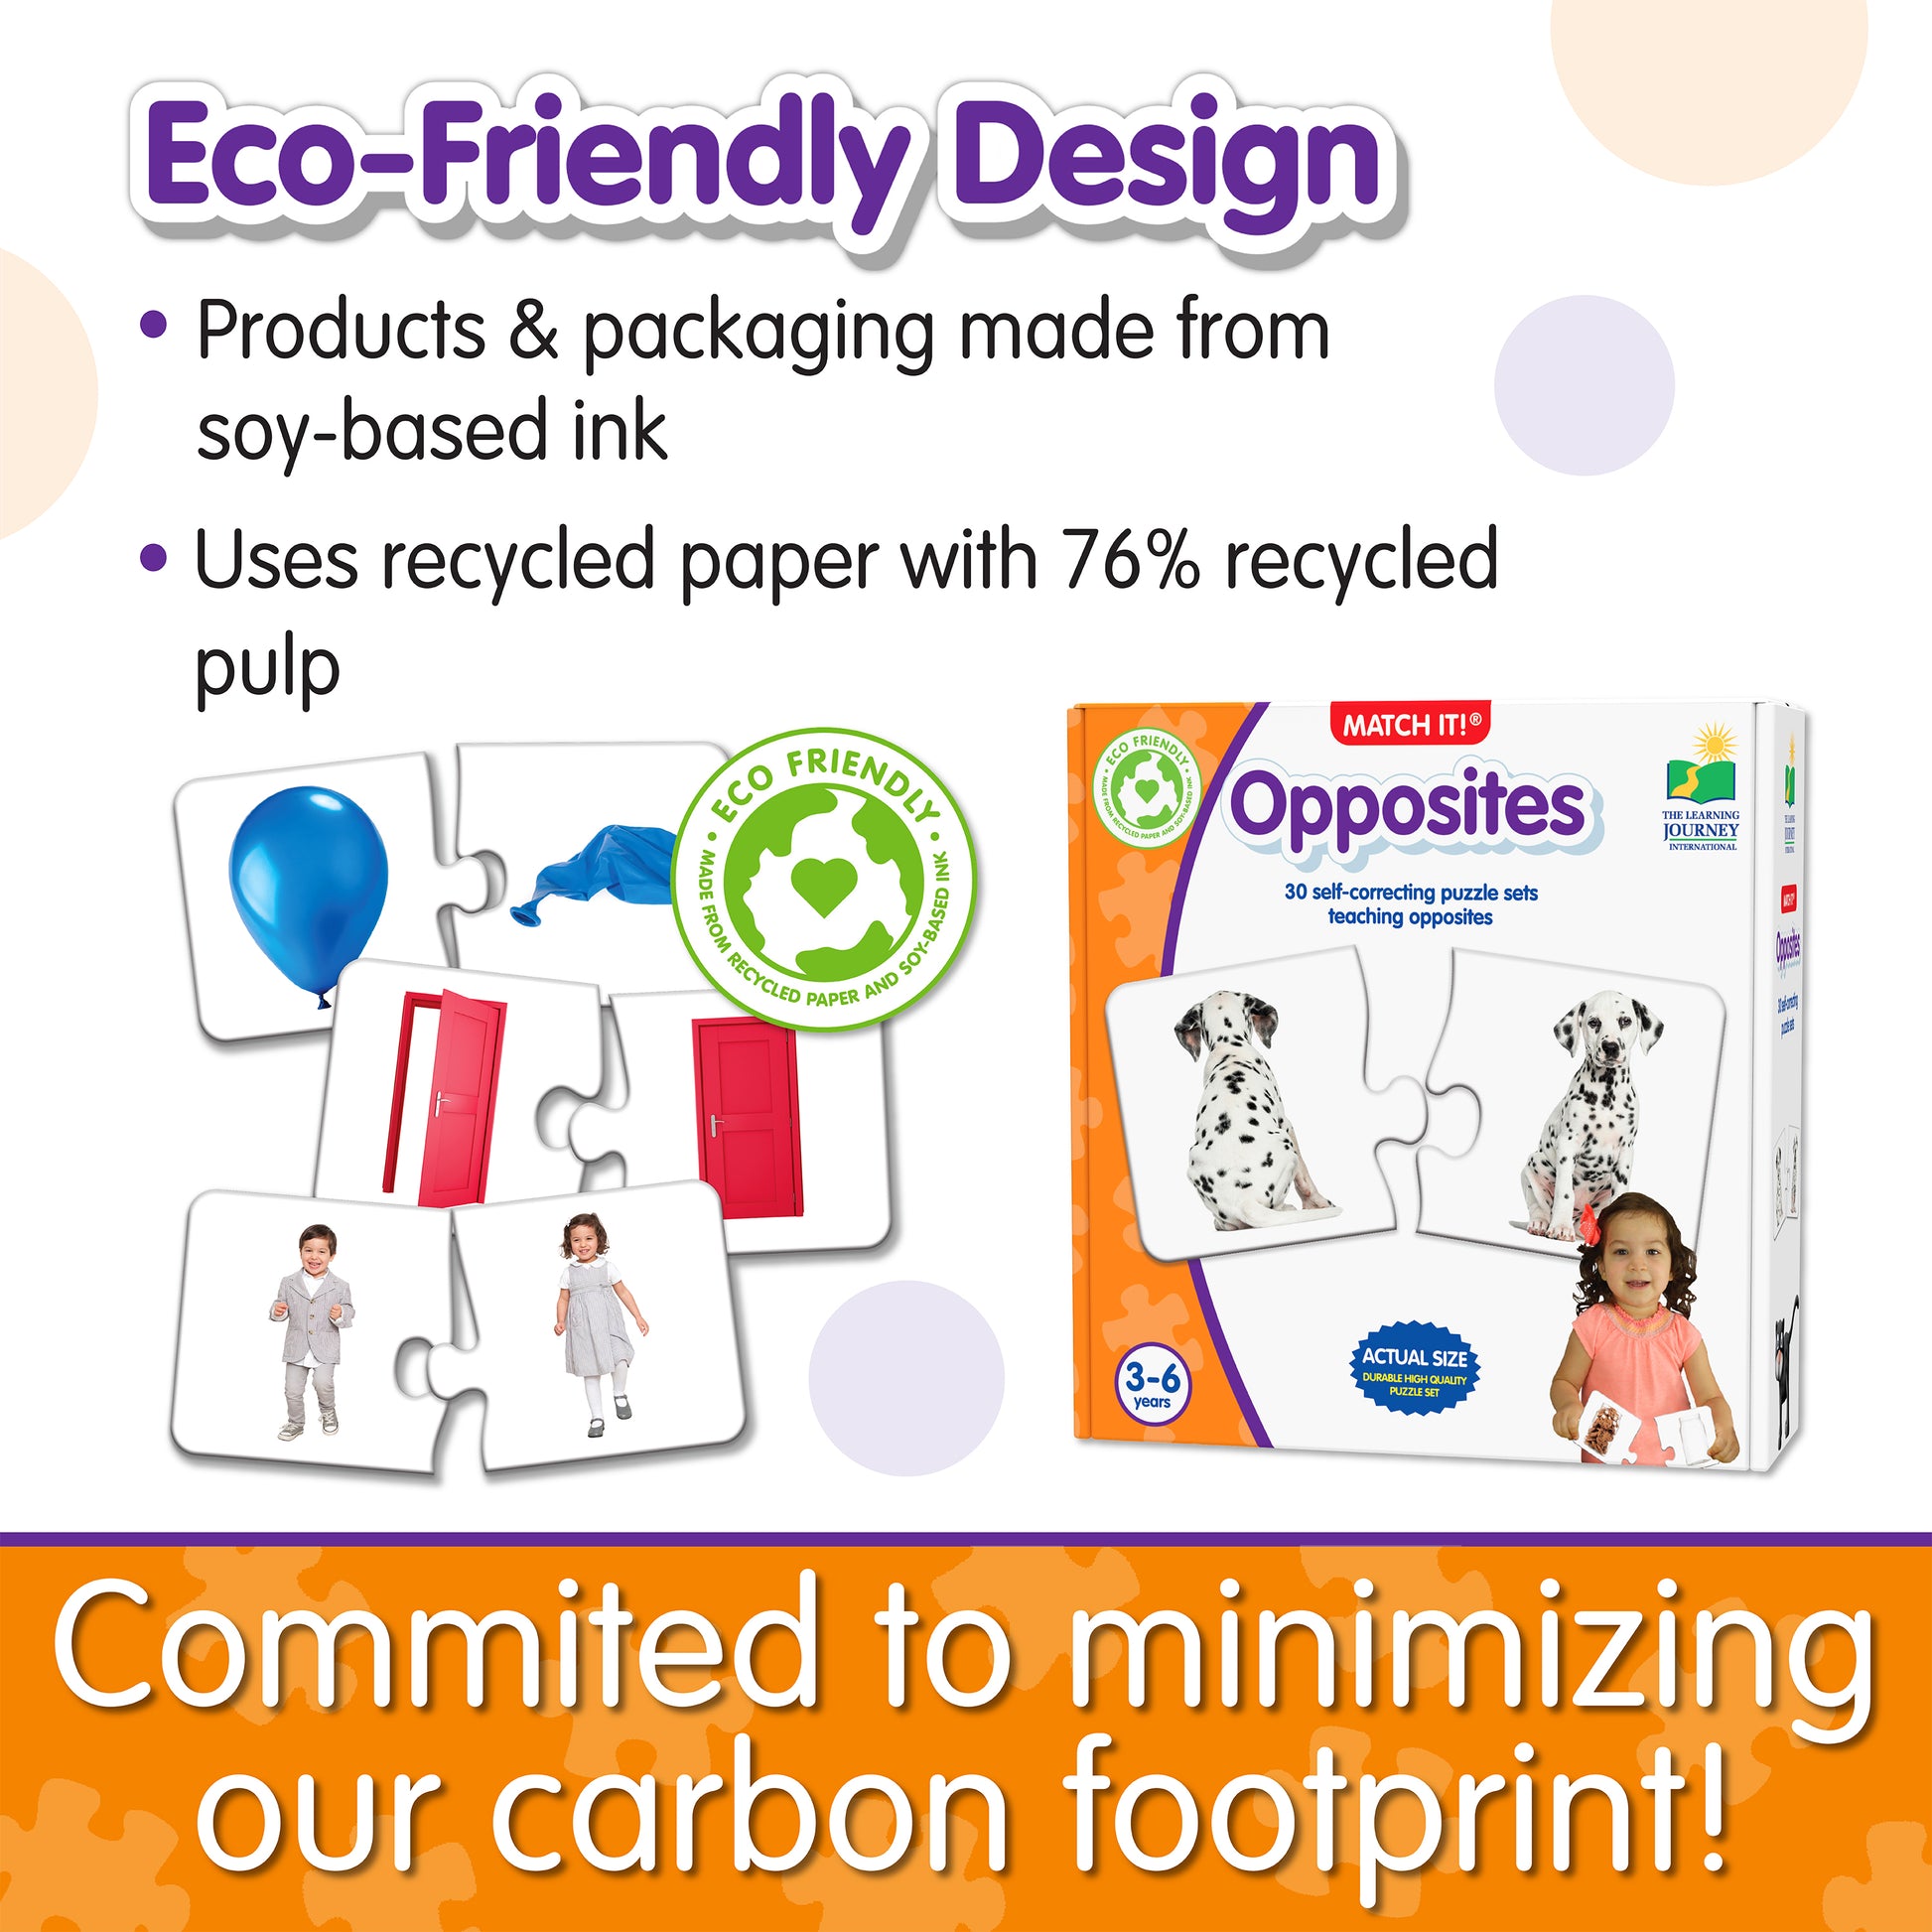 Infographic about Match It - Opposites' eco-friendly design that says, "Committed to minimizing our carbon footprint!"